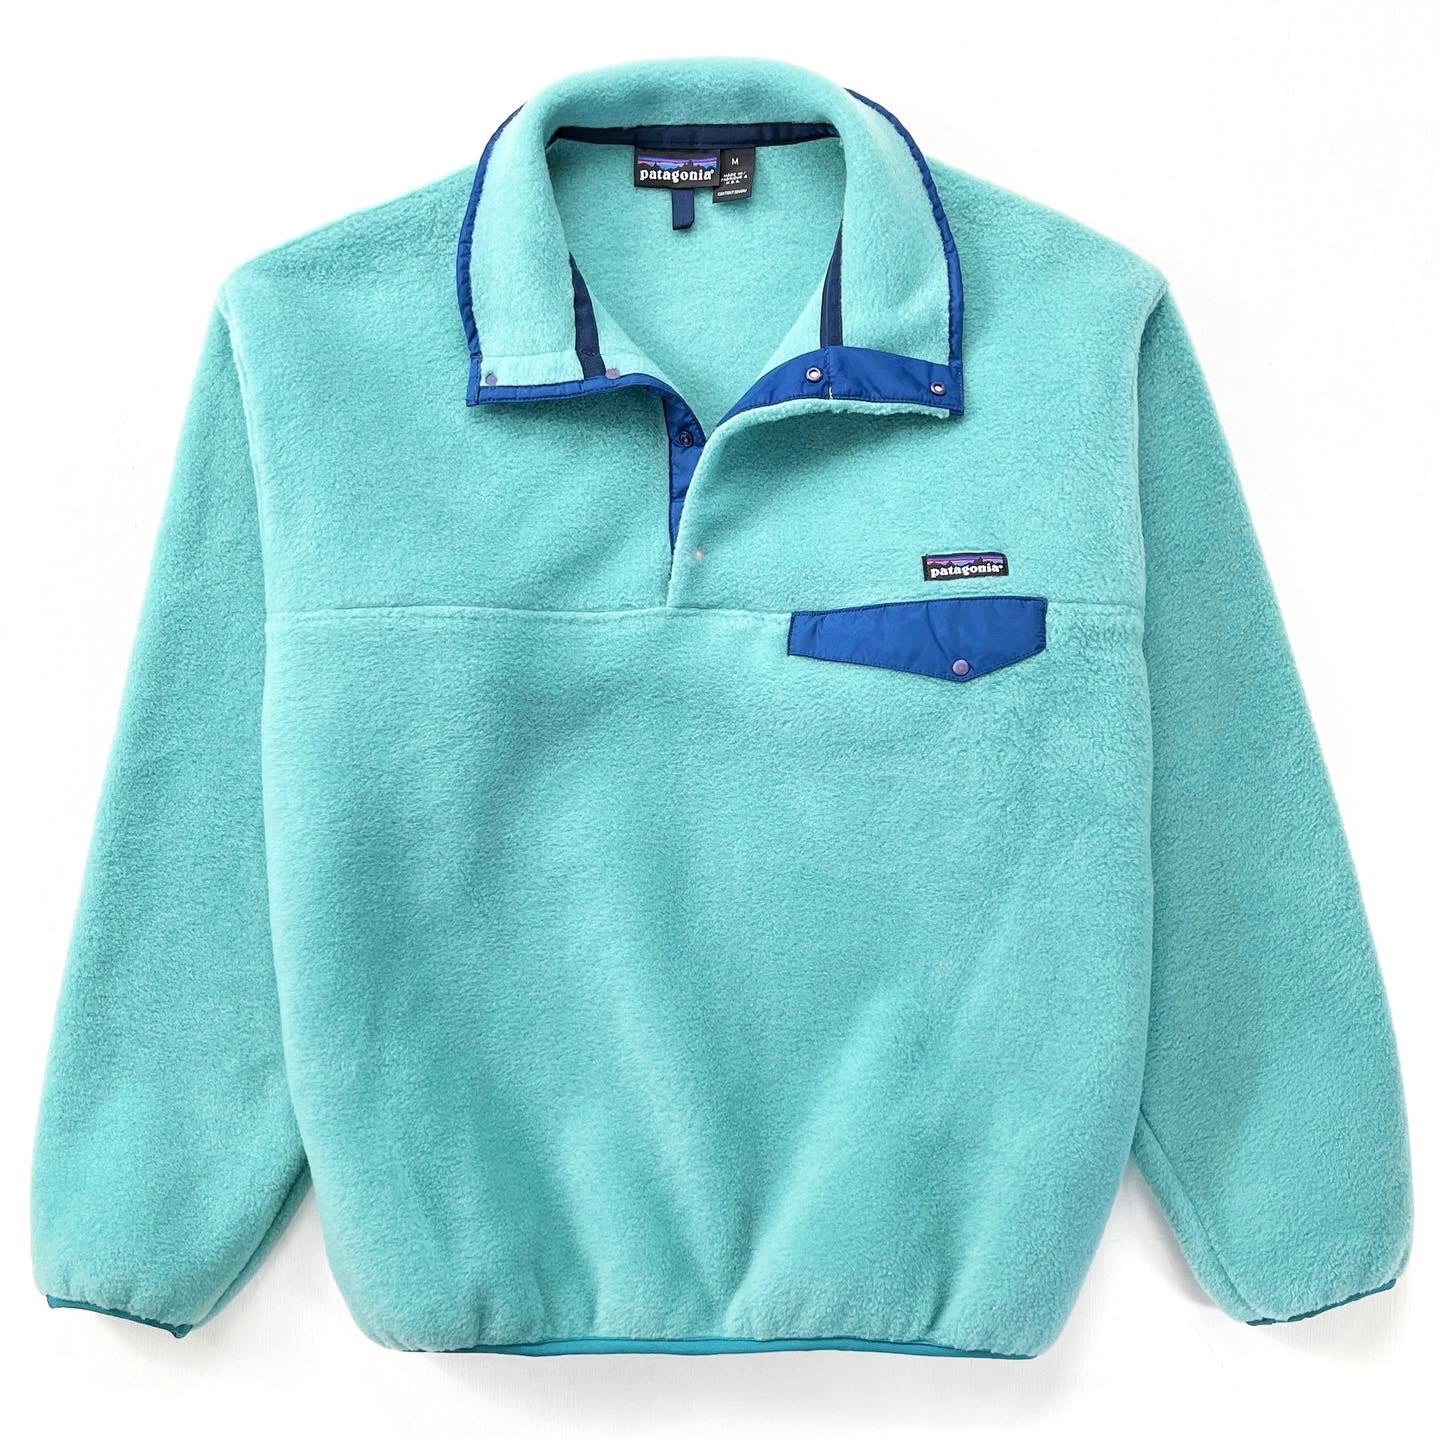 1993 Patagonia Synchilla Snap-T, Sea Green & Ink Blue (M)